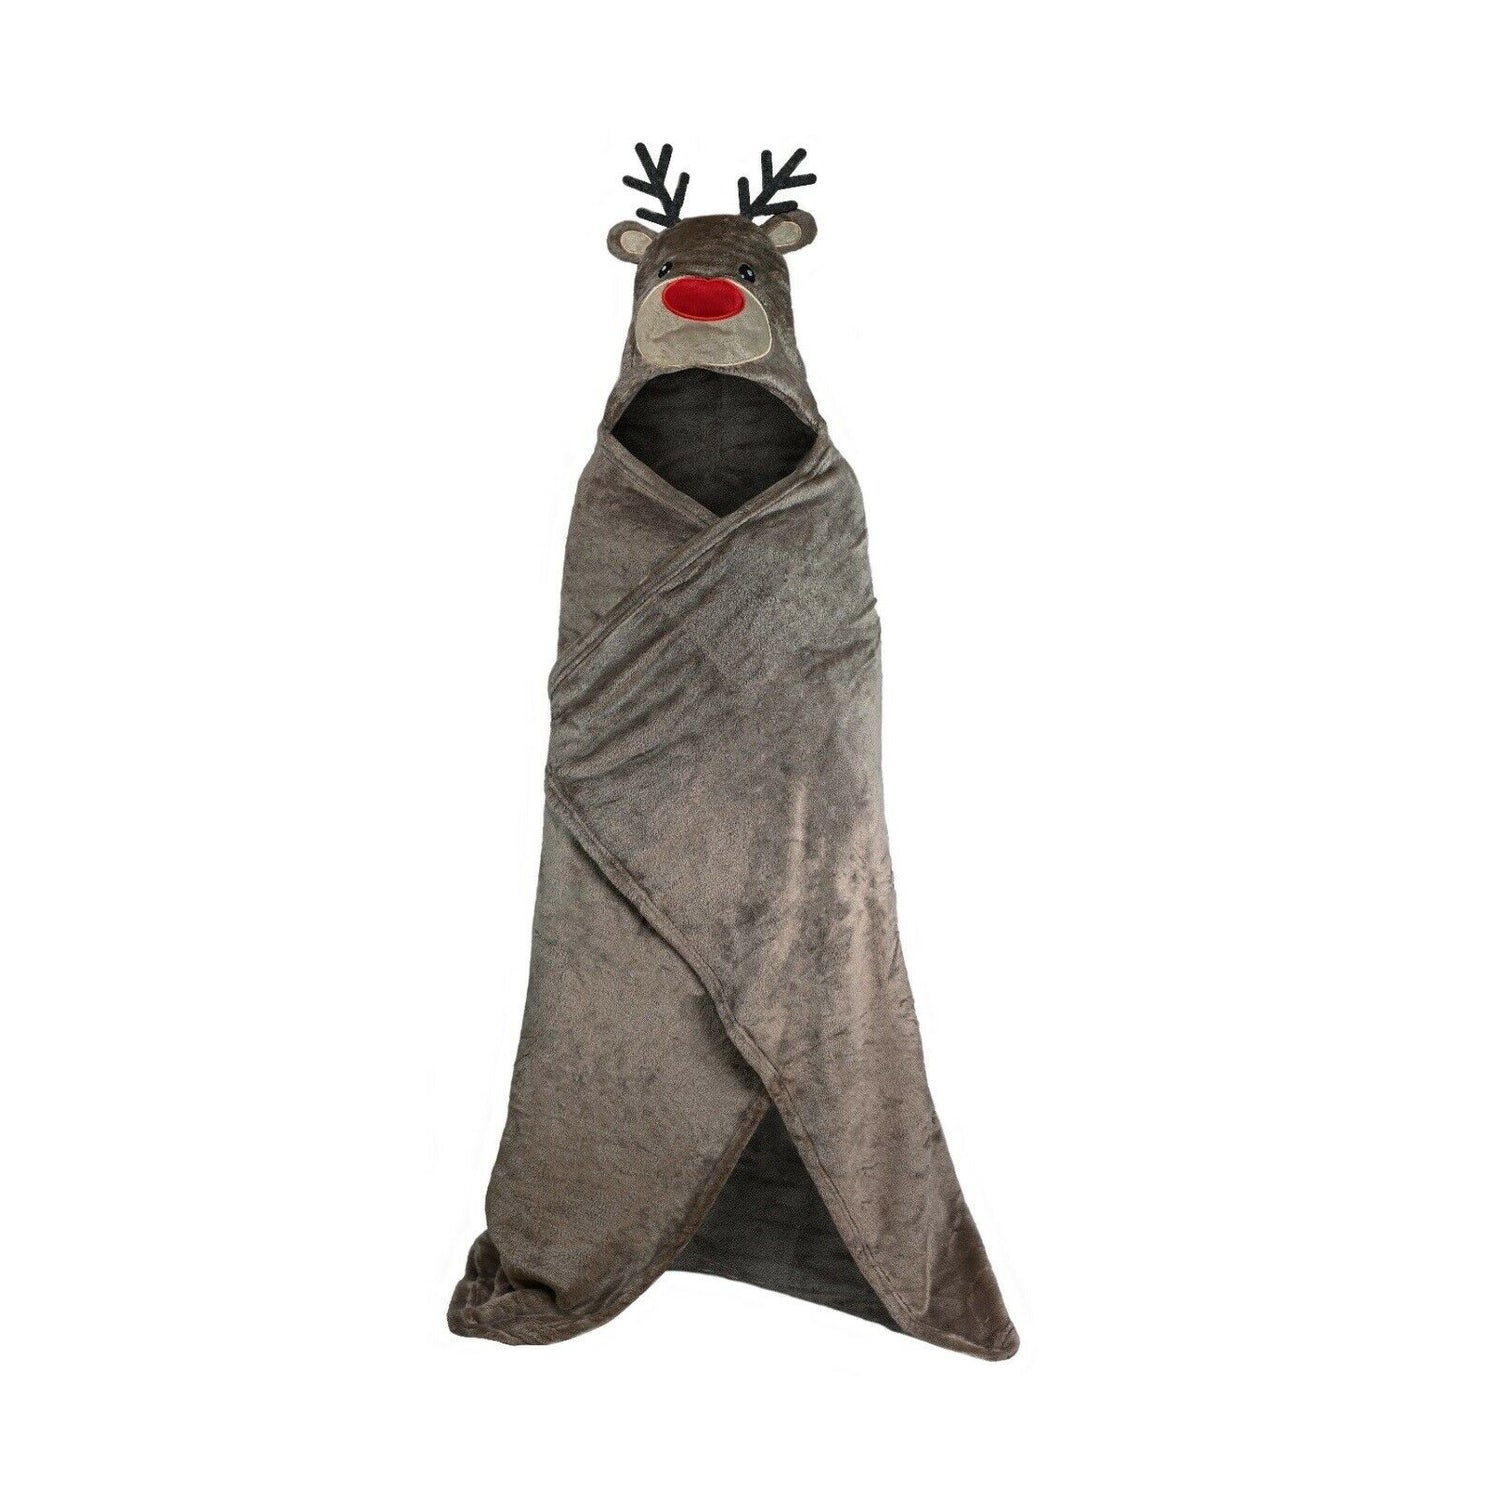 Children's Rudolph Novelty Hooded Fleece Blanket, These Are Super Soft And Perfect For The Festive Season As A Gifts, They Measure 110cm x140cm, 100% Polyester (Excludes Trimming)